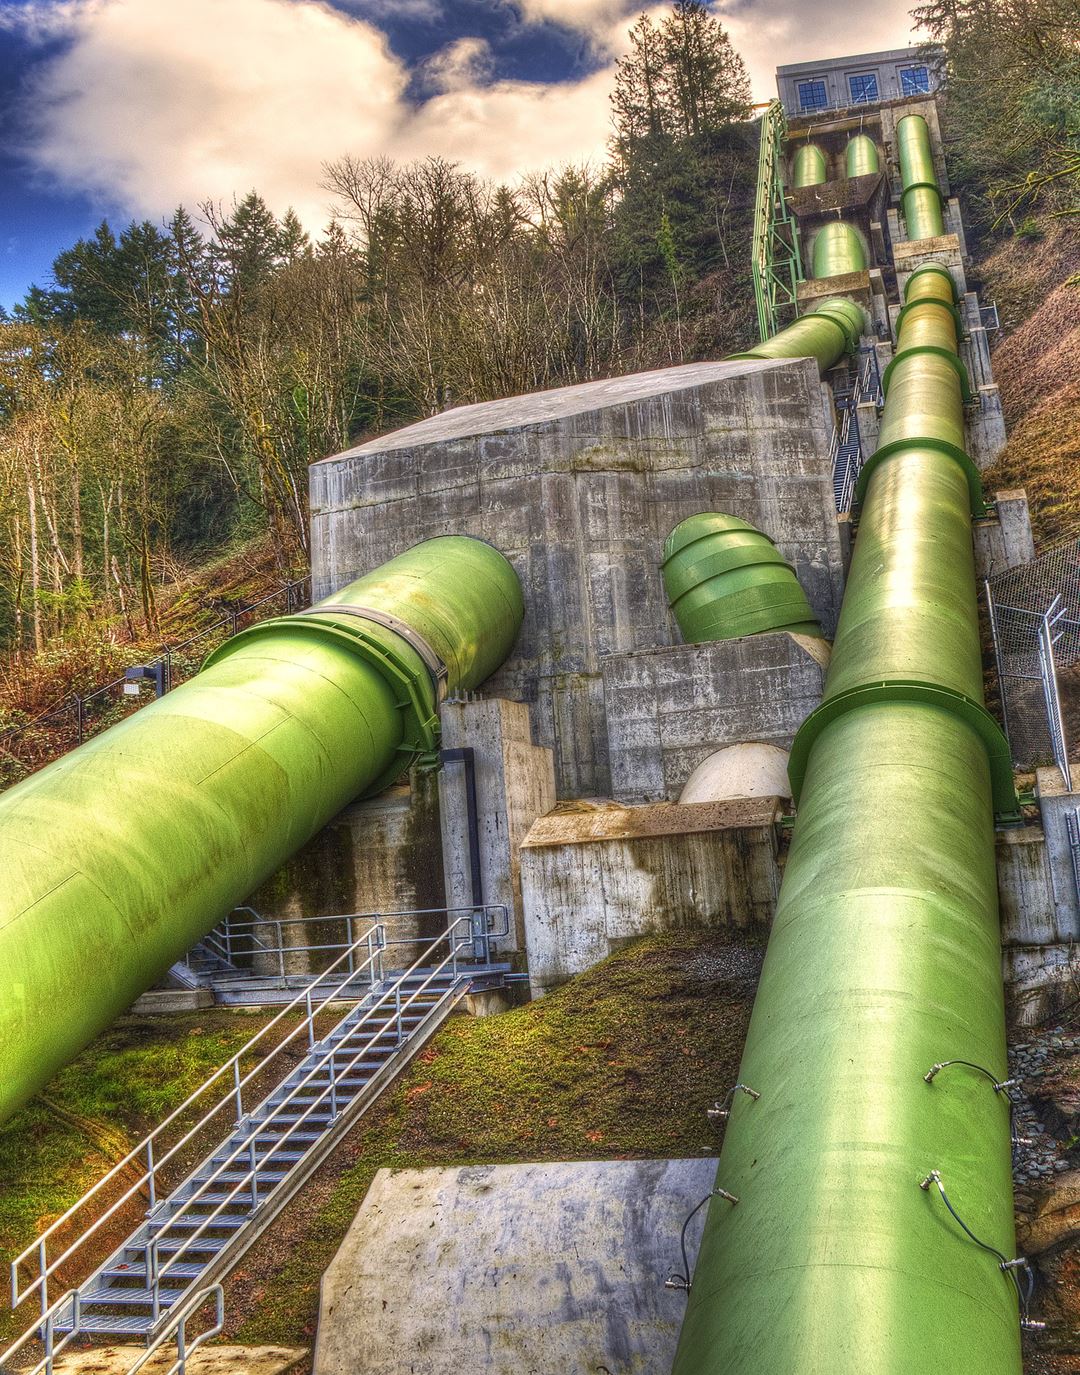 Hydropower pipes